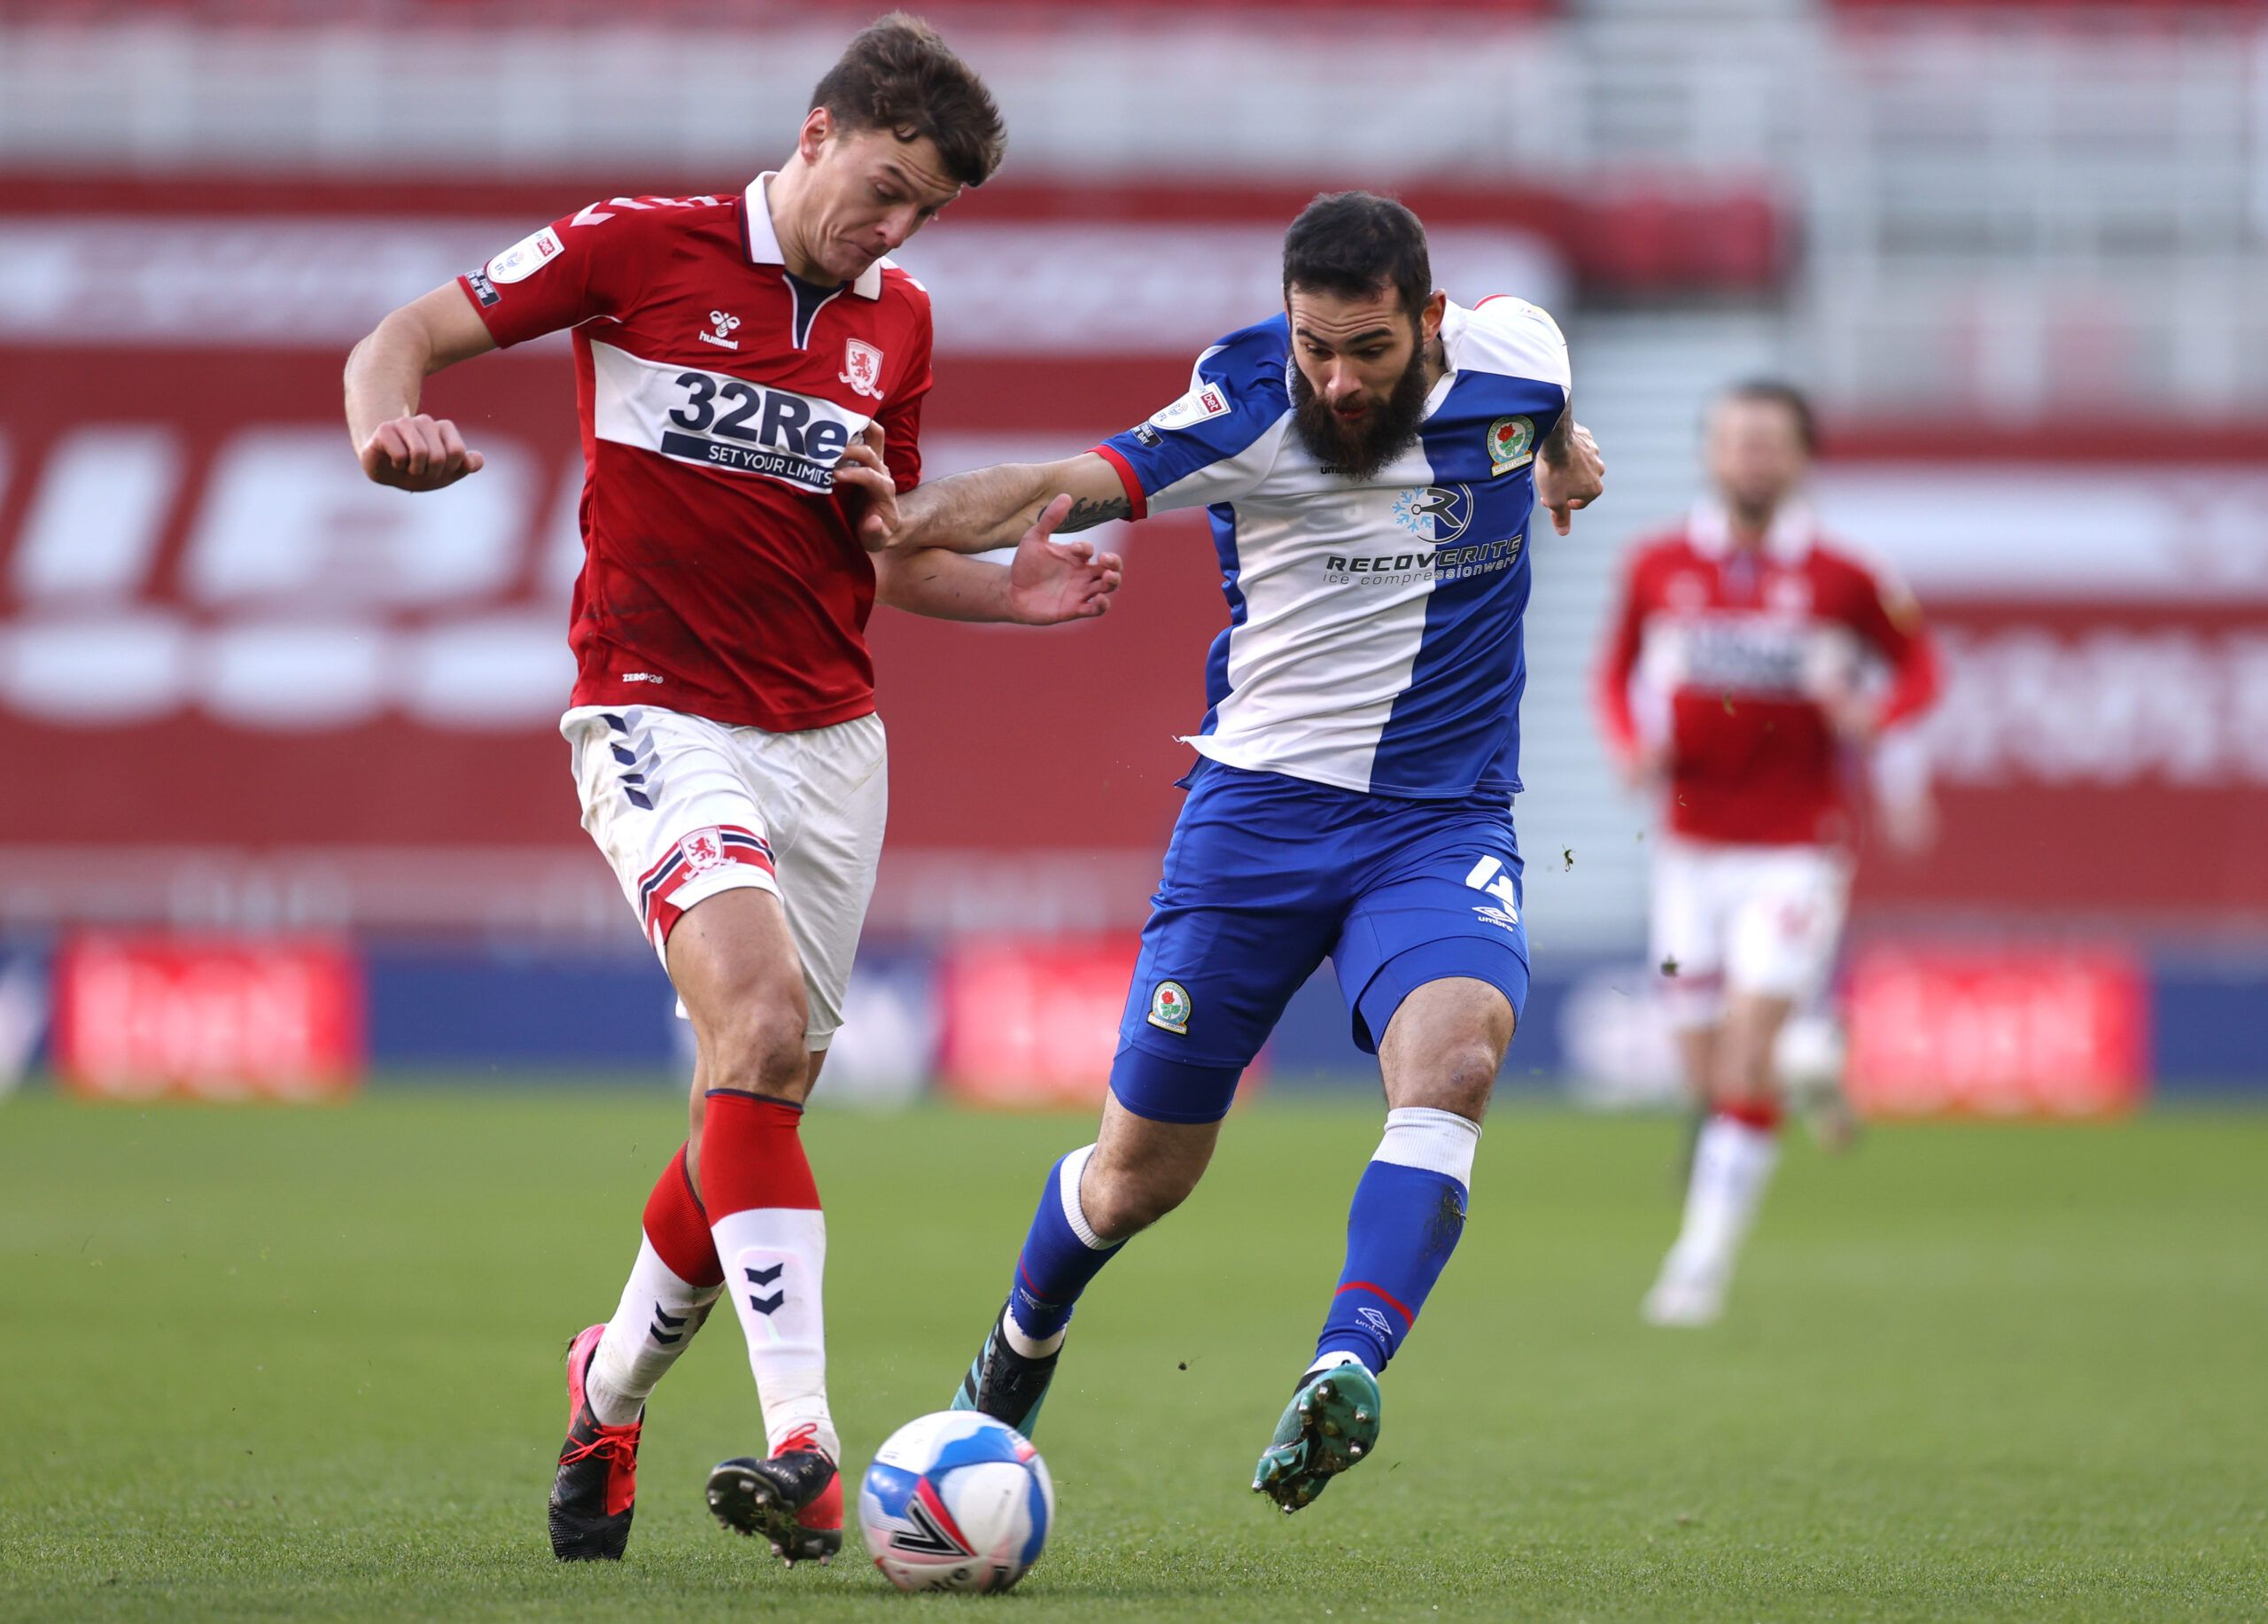 Soccer Football - Championship - Middlesbrough v Blackburn Rovers - Riverside Stadium, Middlesbrough, Britain - January 24, 2021 Middlesbrough's Dael Fry In action with Blackburn's Bradley Johnson Action Images/Lee Smith